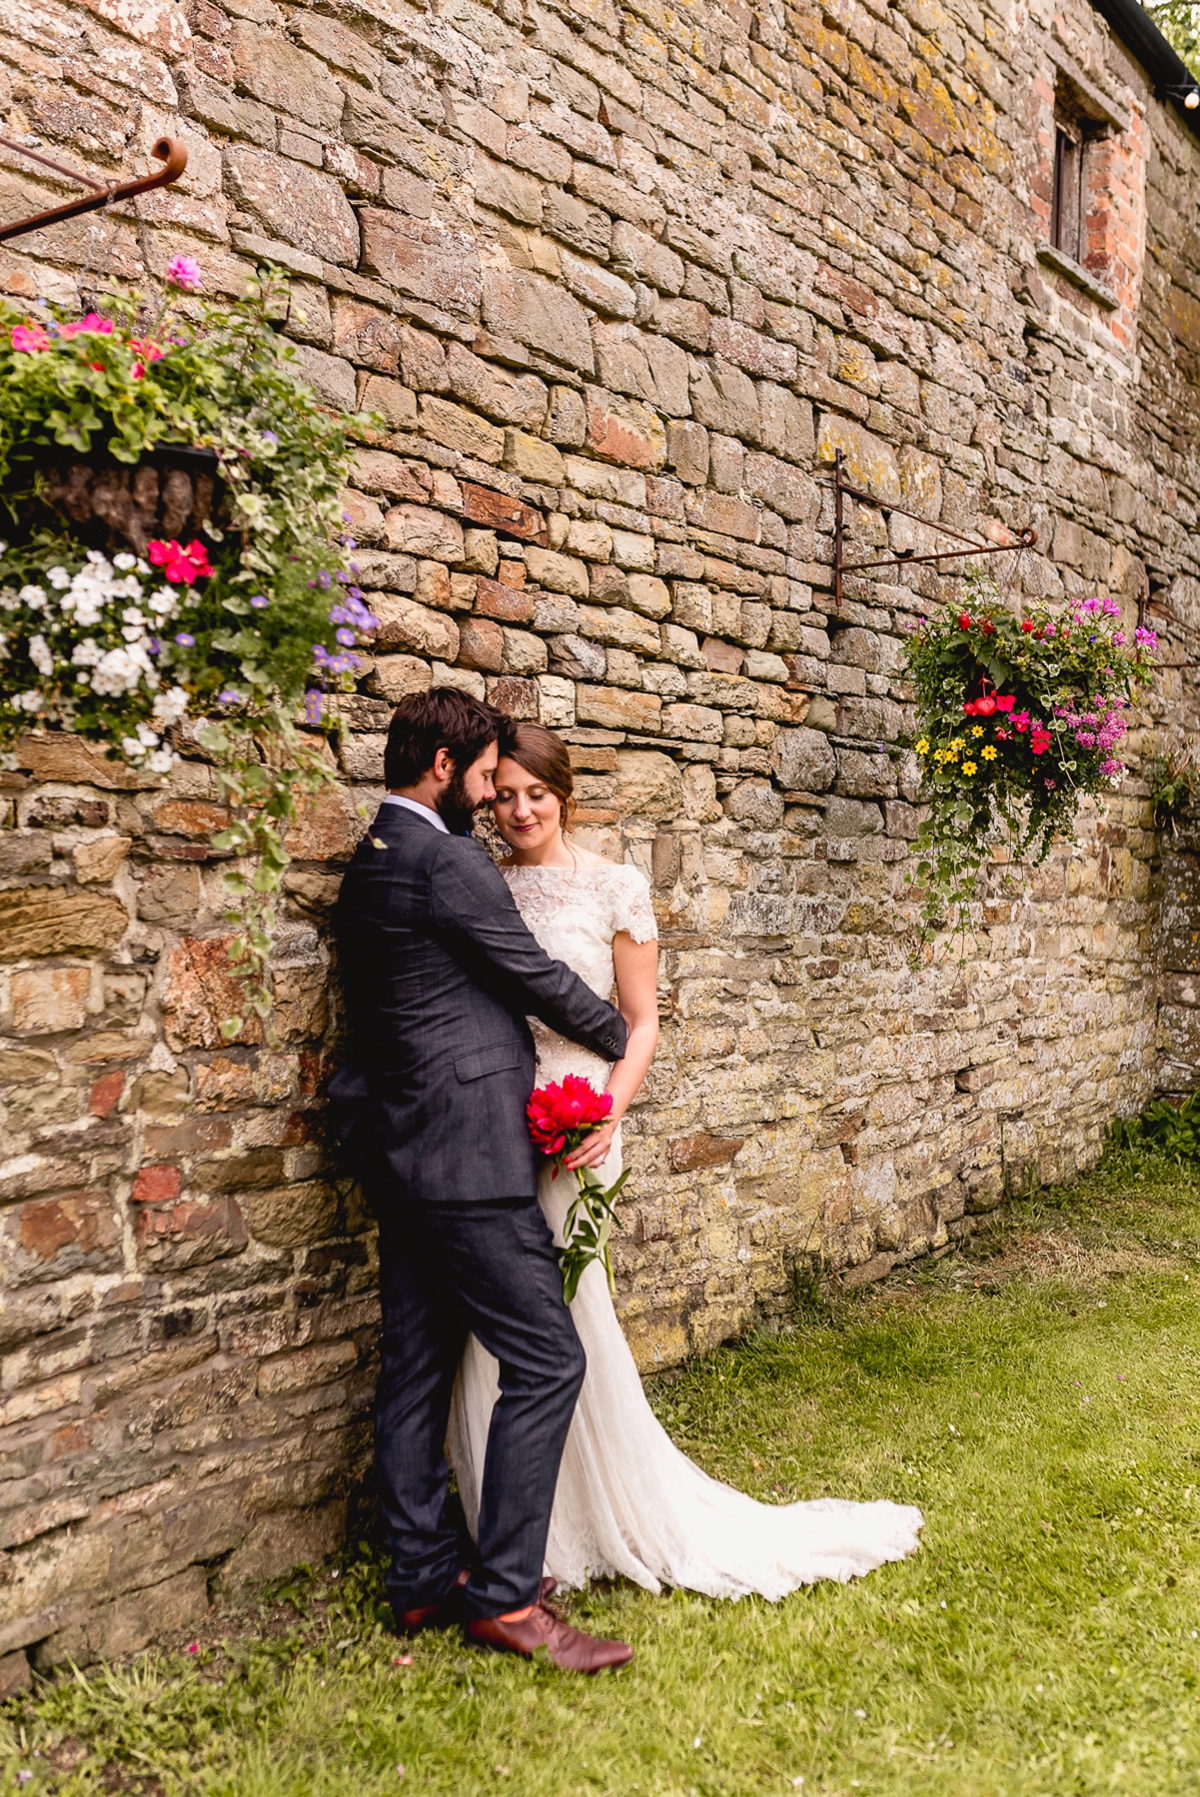 A Badgley Mischka gown for a bright and colourful devon country wedding 40